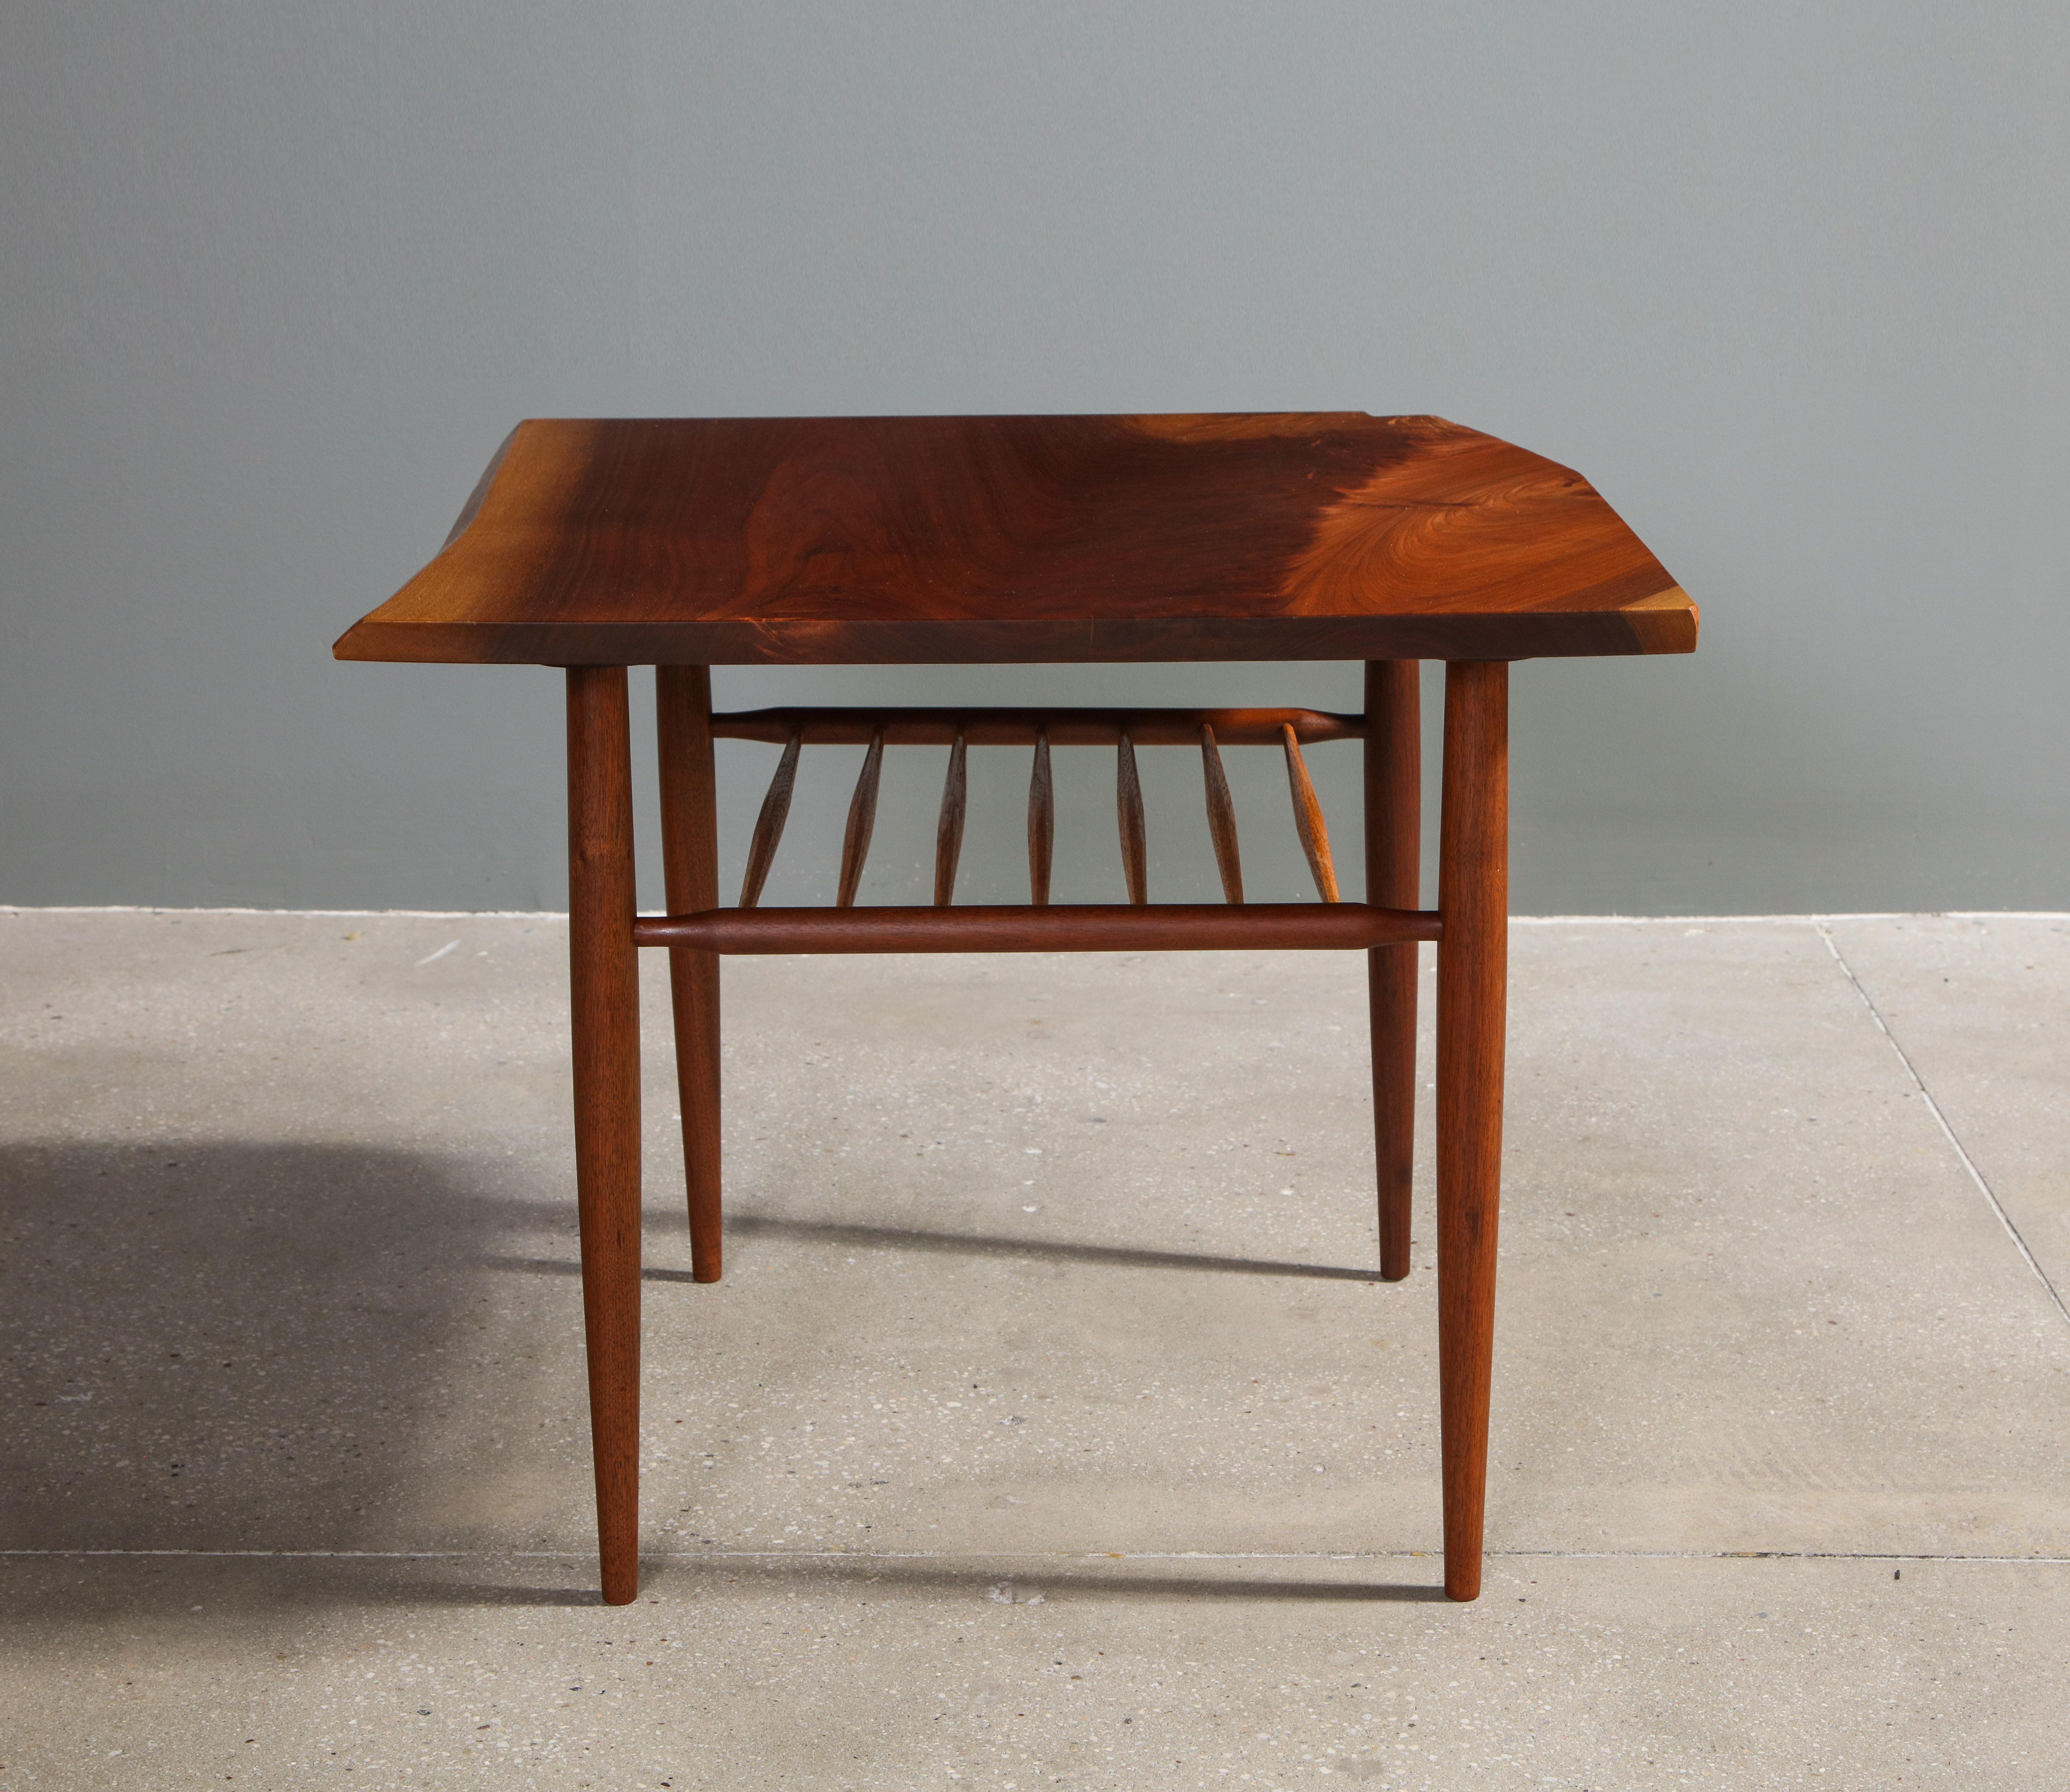 North American Walnut End Table with a Spindle Shelf, by George Nakashima